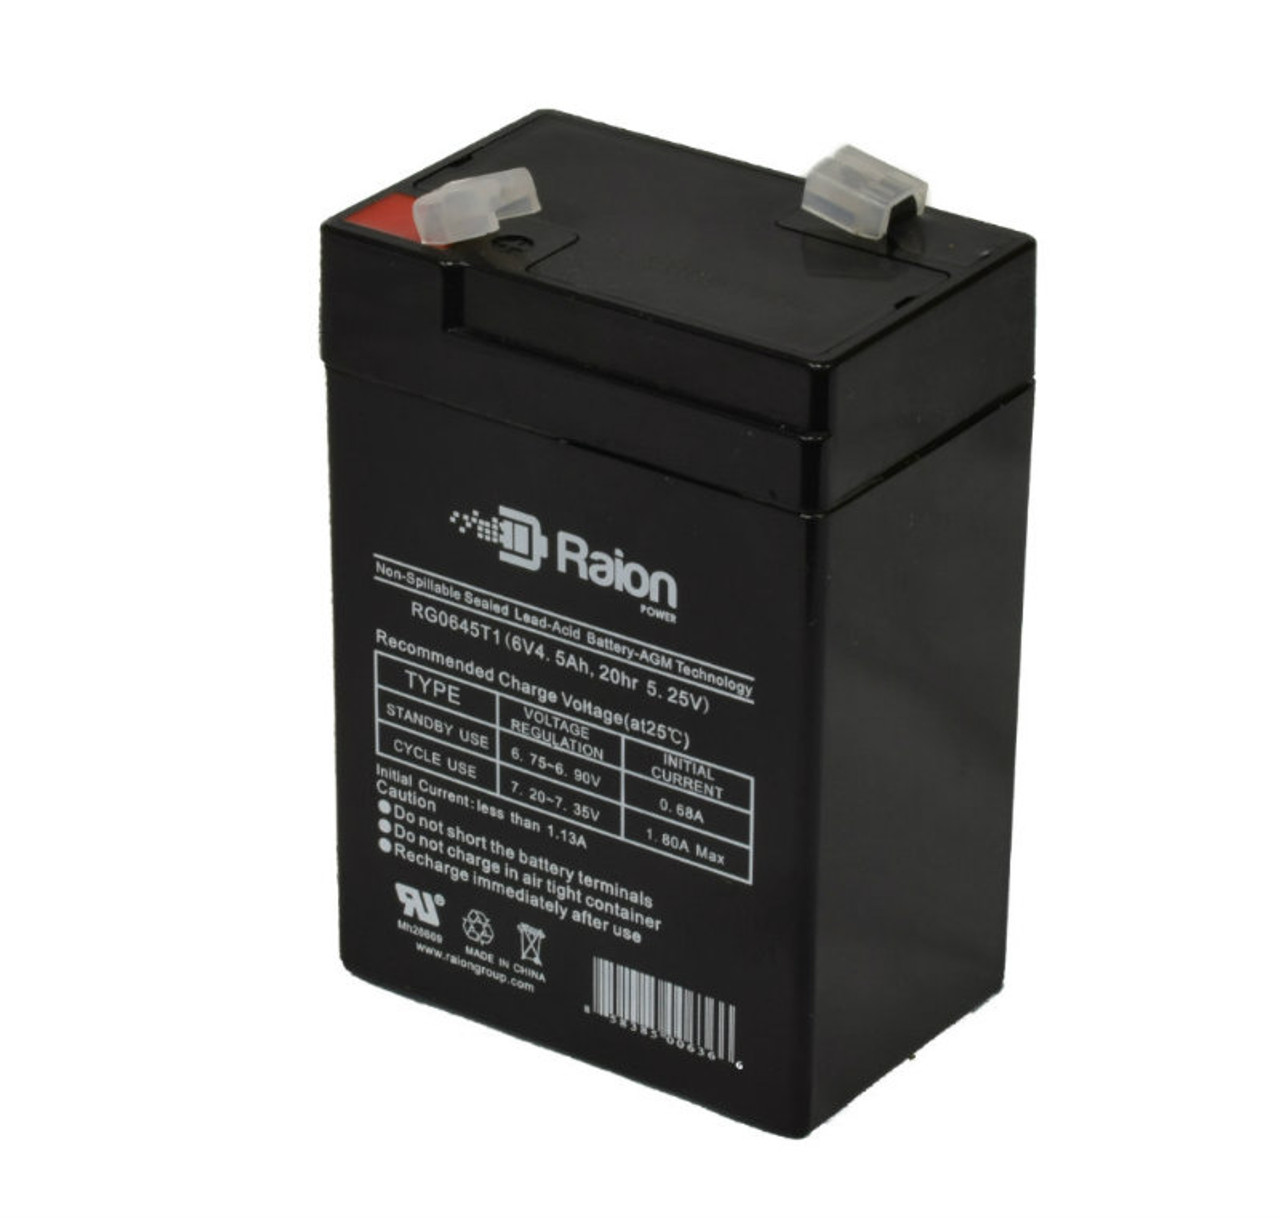 Raion Power RG0645T1 6V 4.5Ah Replacement Battery Cartridge for Lucky Duck Pro Series Super Lucky Drake